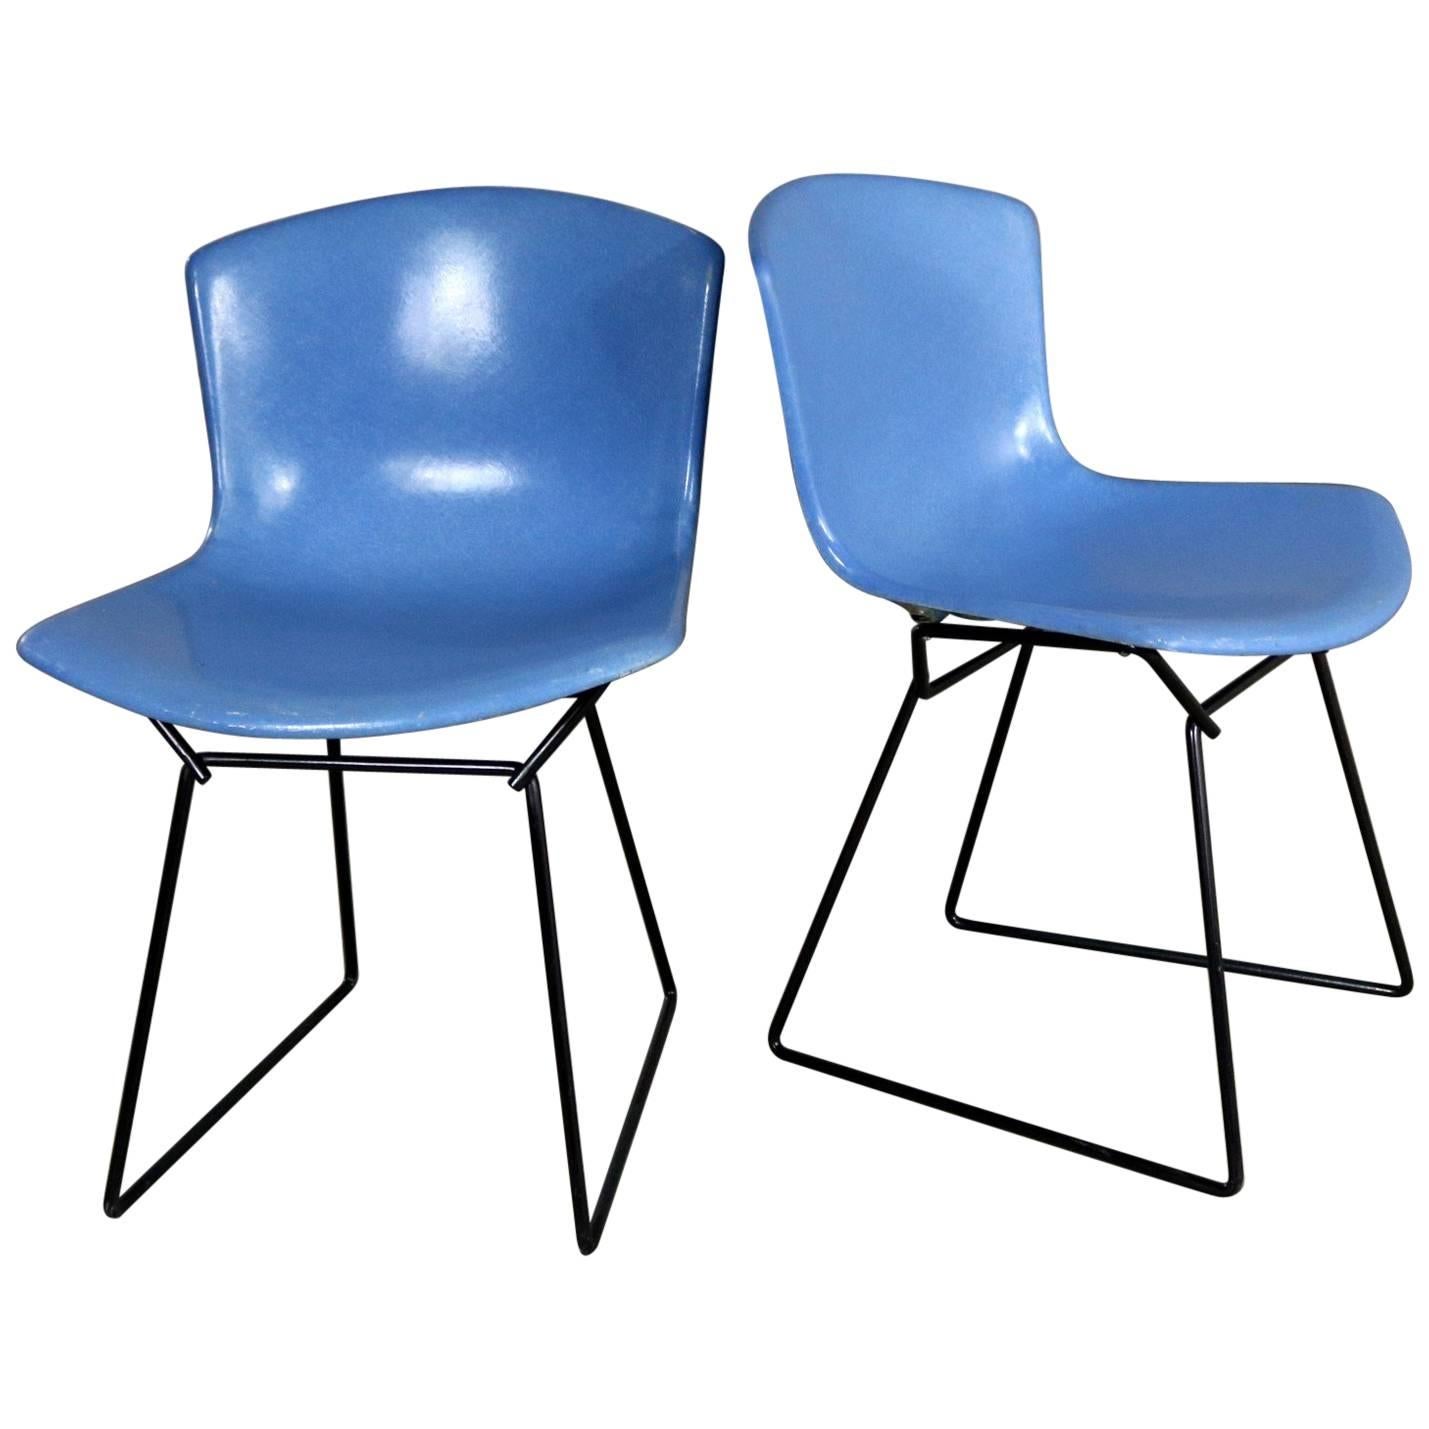 Pair of Harry Bertoia for Knoll Blue Fiberglass Side Chairs Black Wire Base